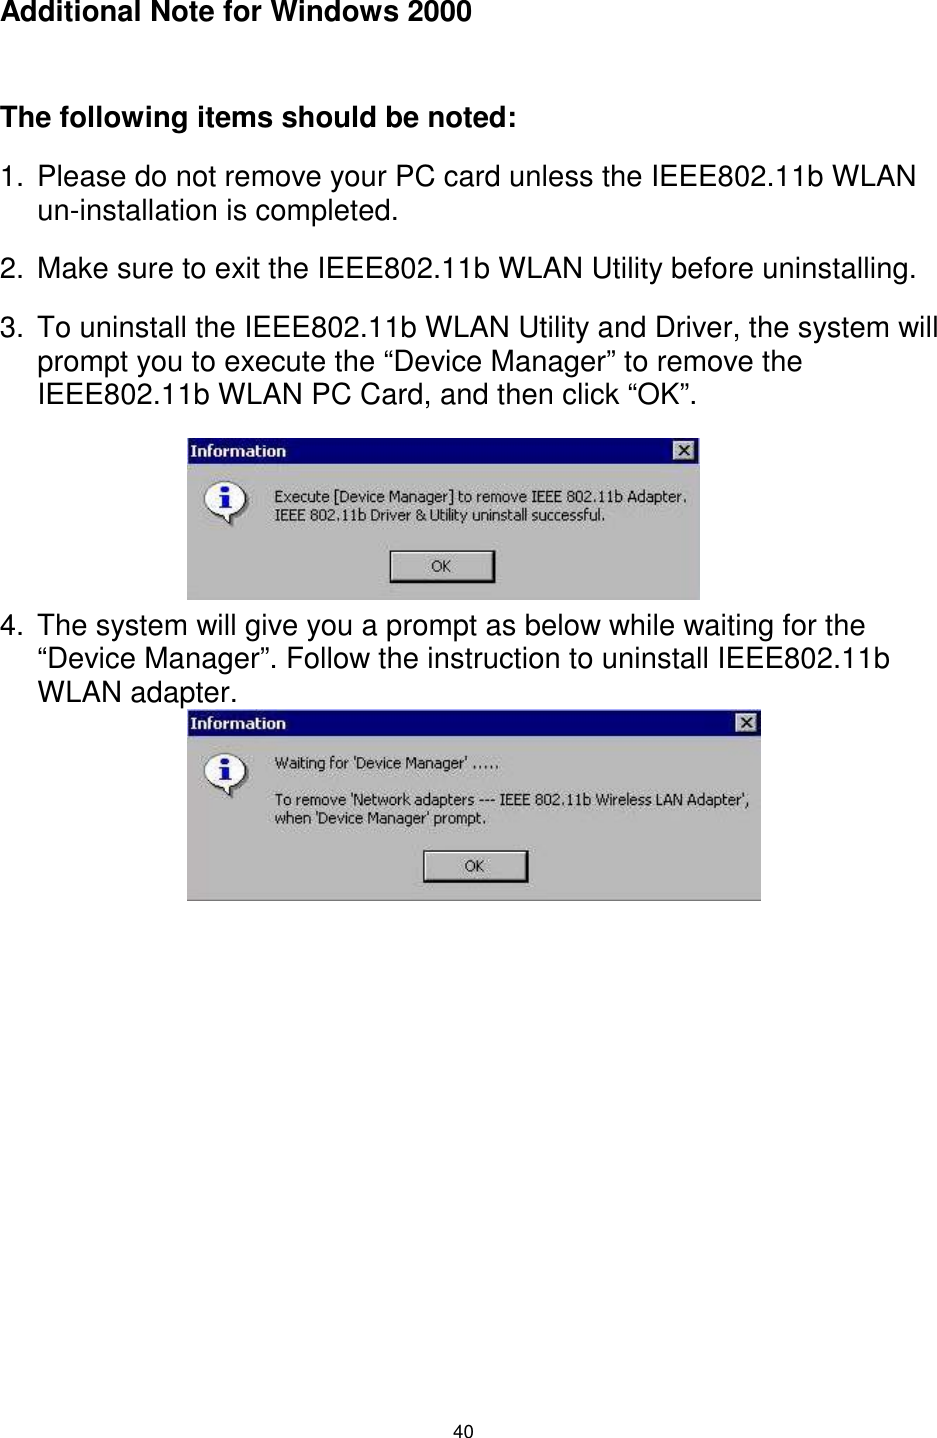  40 Additional Note for Windows 2000  The following items should be noted: 1.  Please do not remove your PC card unless the IEEE802.11b WLAN un-installation is completed. 2.  Make sure to exit the IEEE802.11b WLAN Utility before uninstalling. 3.  To uninstall the IEEE802.11b WLAN Utility and Driver, the system will prompt you to execute the “Device Manager” to remove the IEEE802.11b WLAN PC Card, and then click “OK”.      4.  The system will give you a prompt as below while waiting for the “Device Manager”. Follow the instruction to uninstall IEEE802.11b WLAN adapter.     